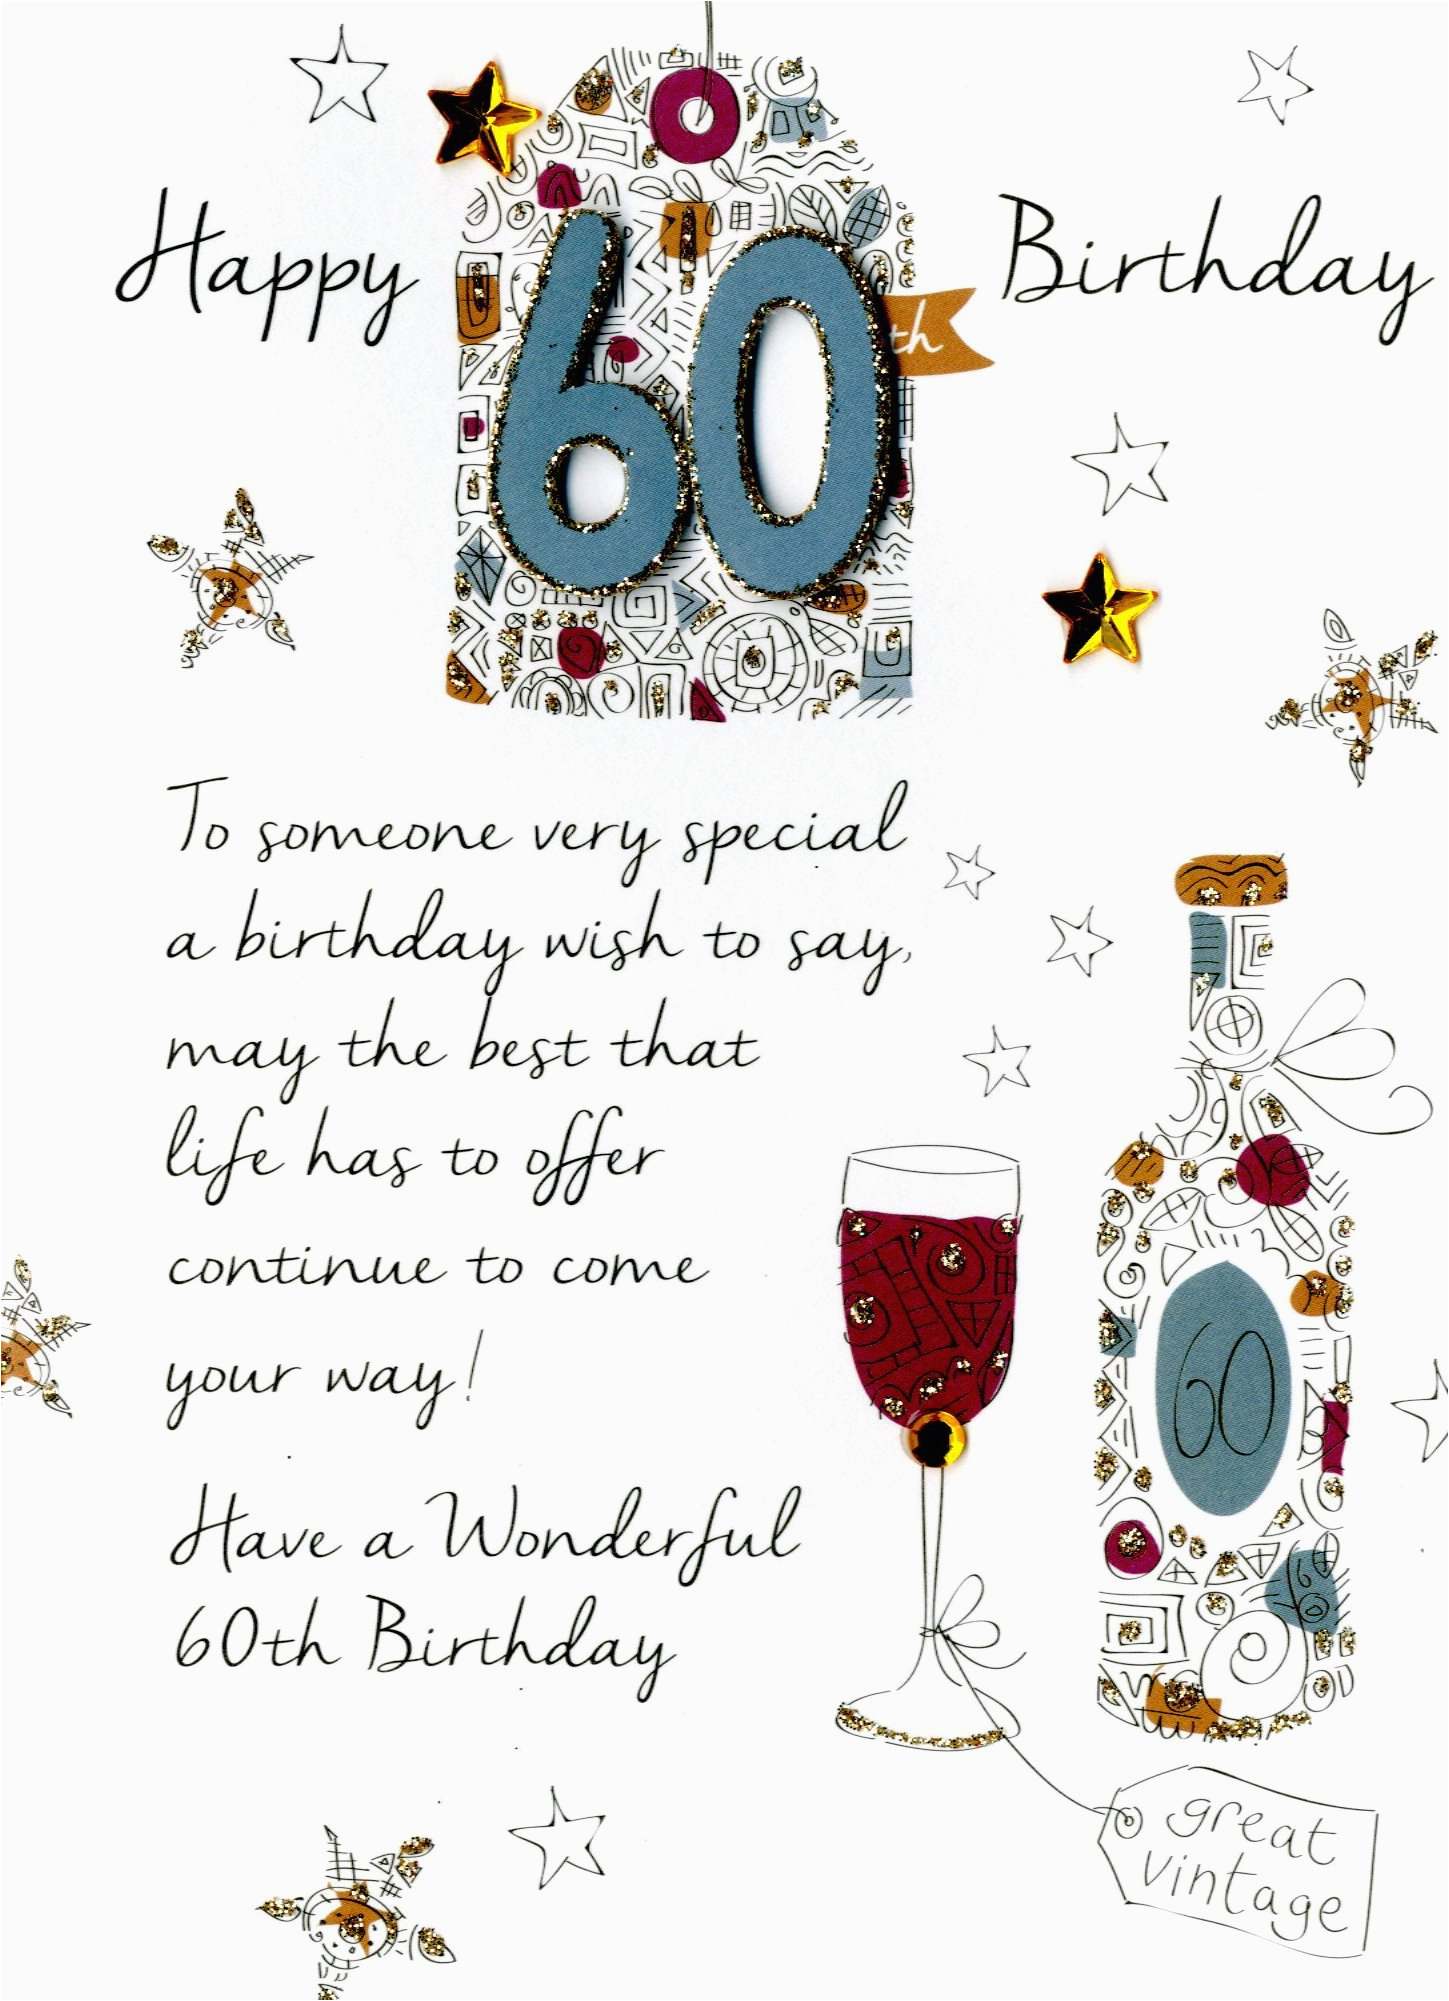 Birthday Wishes For 60th Birthday Male